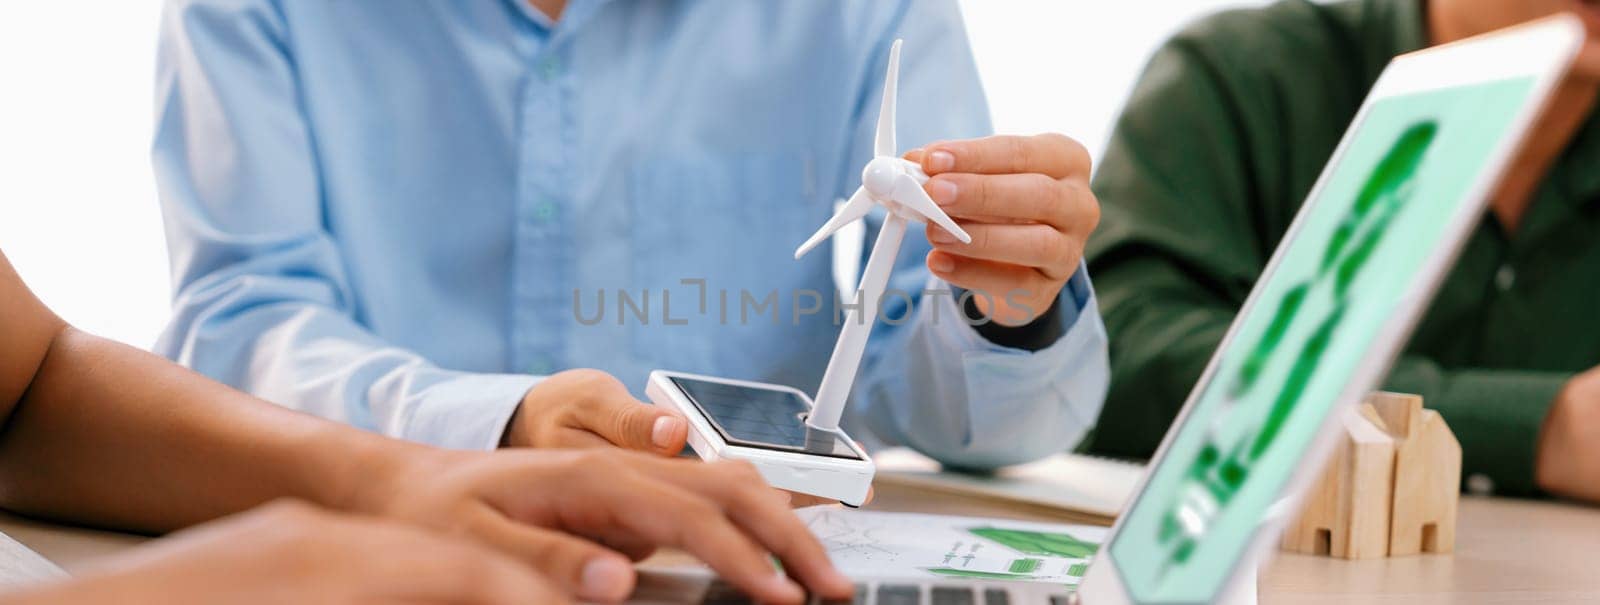 Professional businessman sees opportunity in the growing clean energy market at meeting room on table with windmill represented clean energy scatter around. Closeup. Focus on hand. Delineation